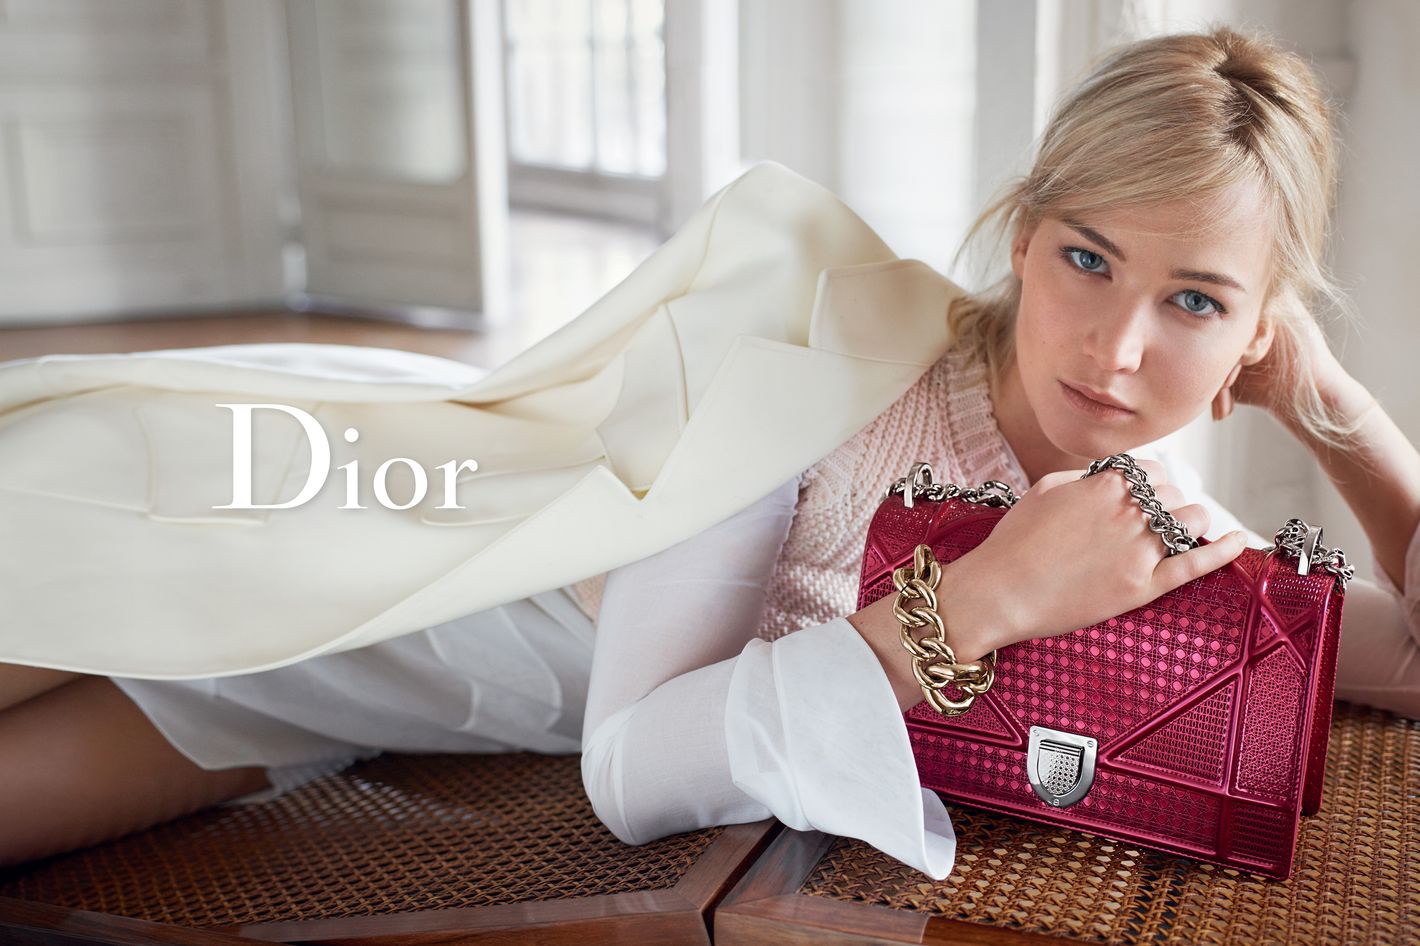 Watch Jennifer Lawrence's New Dior Campaign